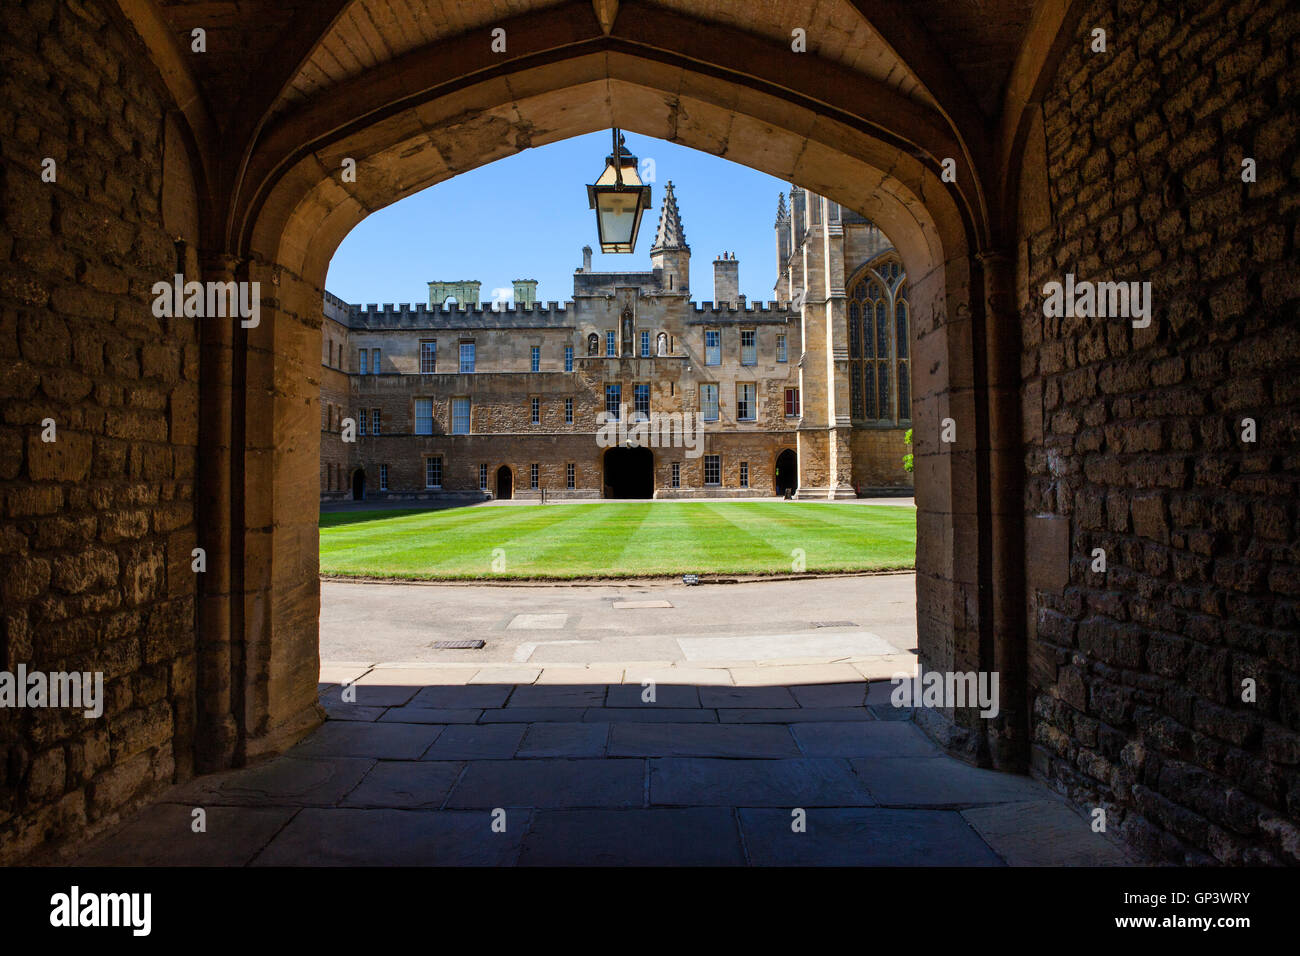 A view inside New College - one of the historic colleges of Oxford University, England. Stock Photo